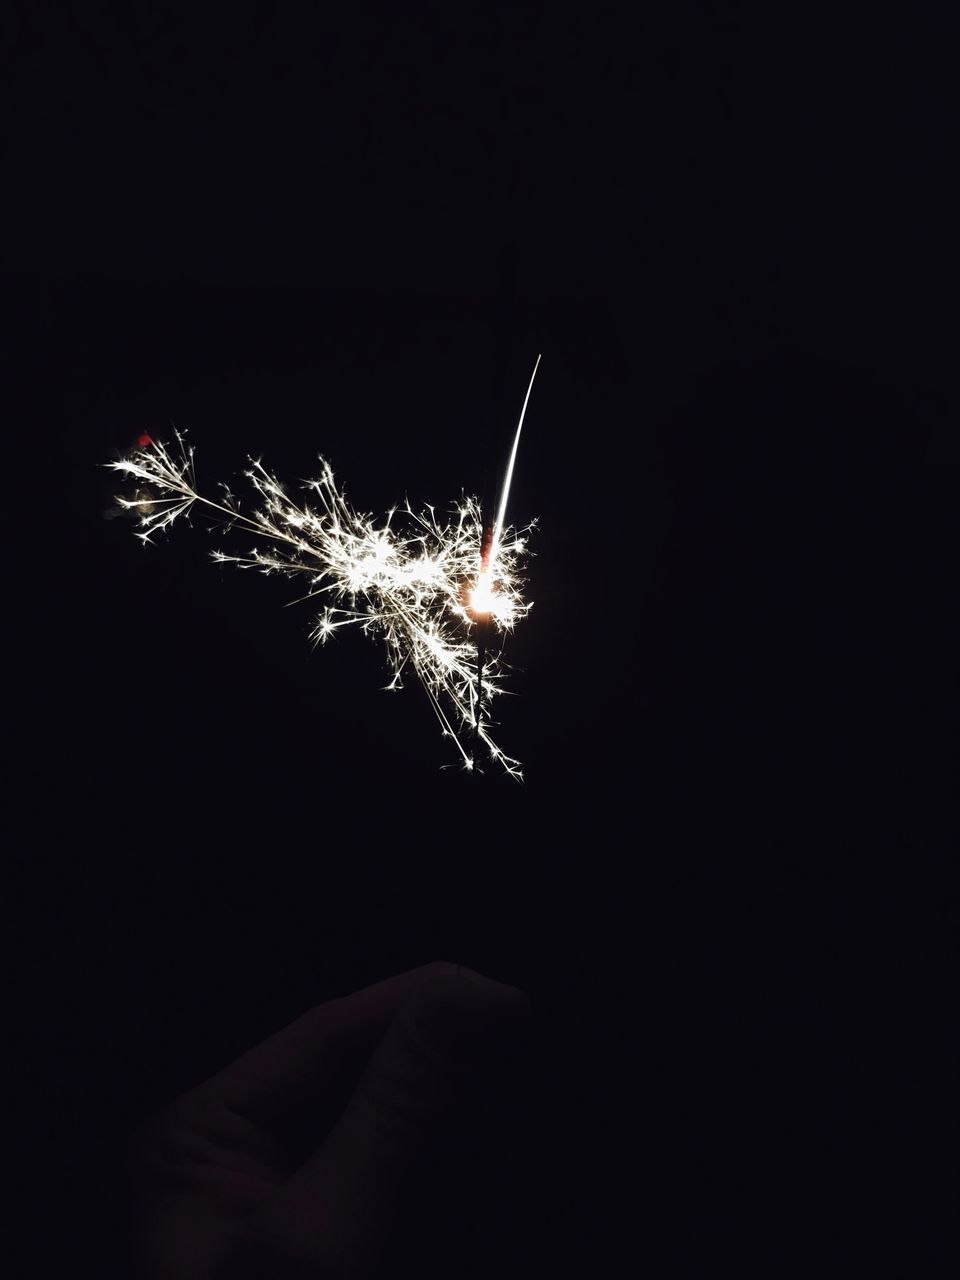 LOW ANGLE VIEW OF FIREWORK DISPLAY AGAINST BLACK BACKGROUND